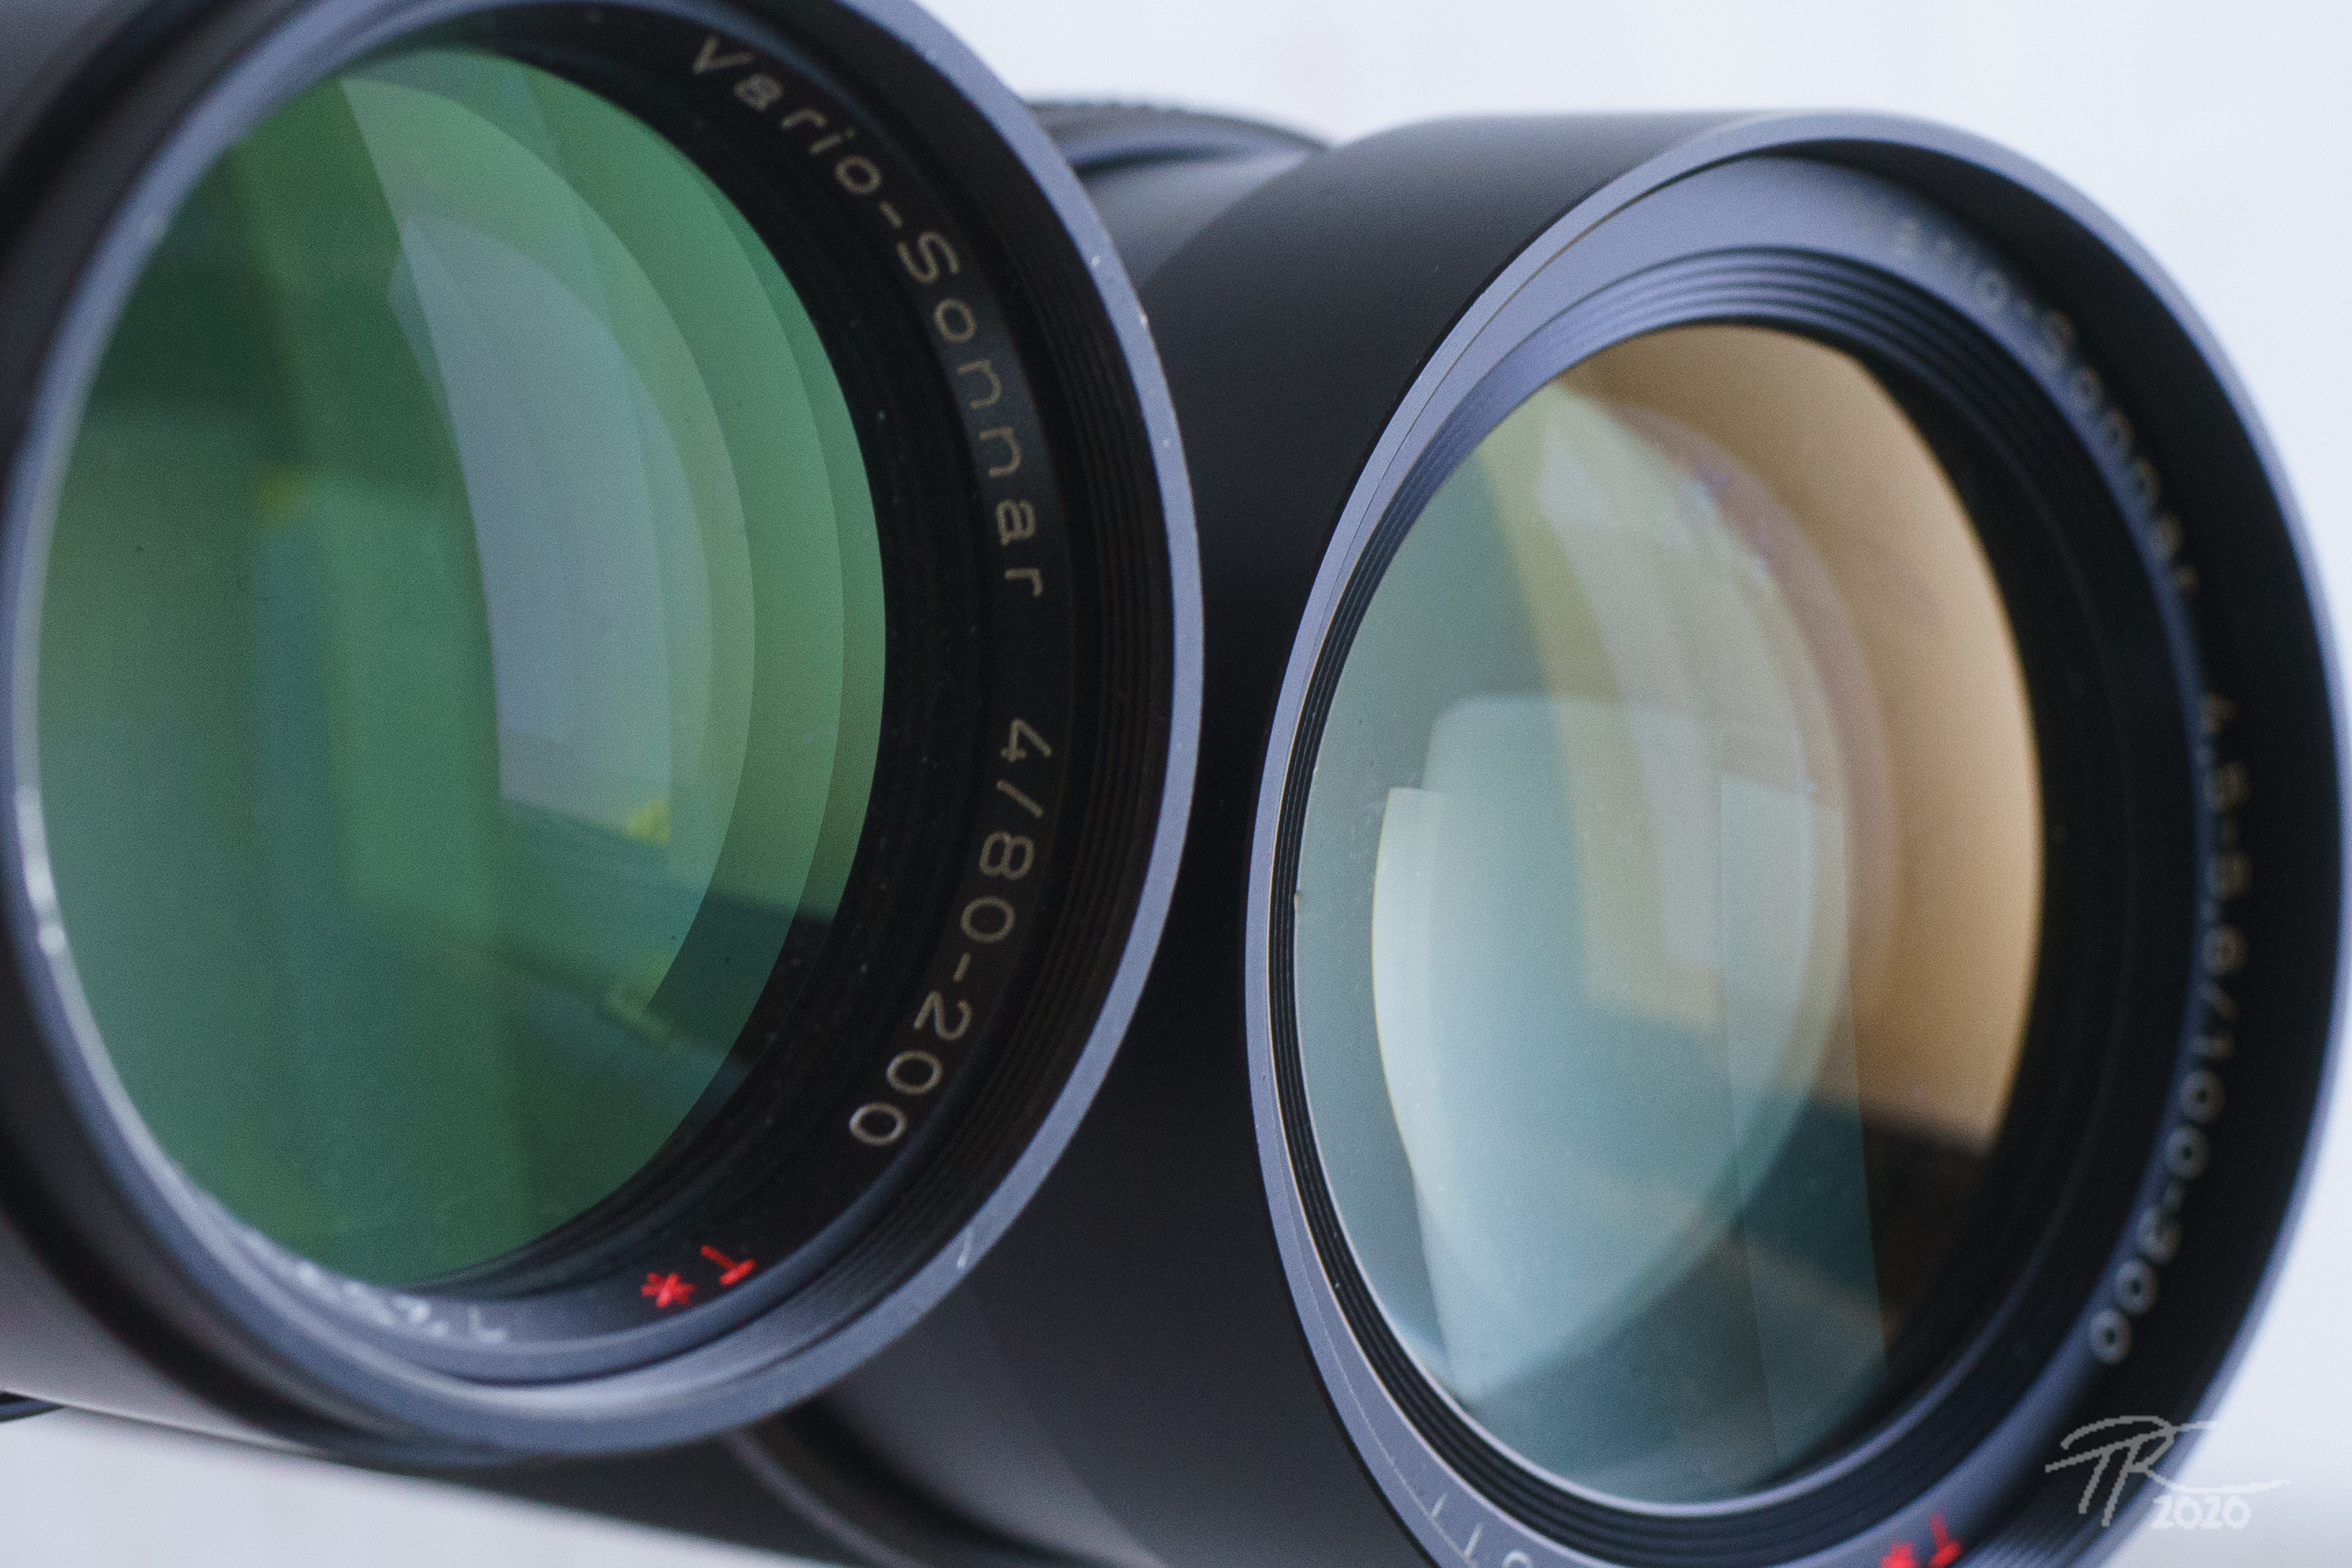 A Zeiss legend and its viceroy – The other side of Bokeh